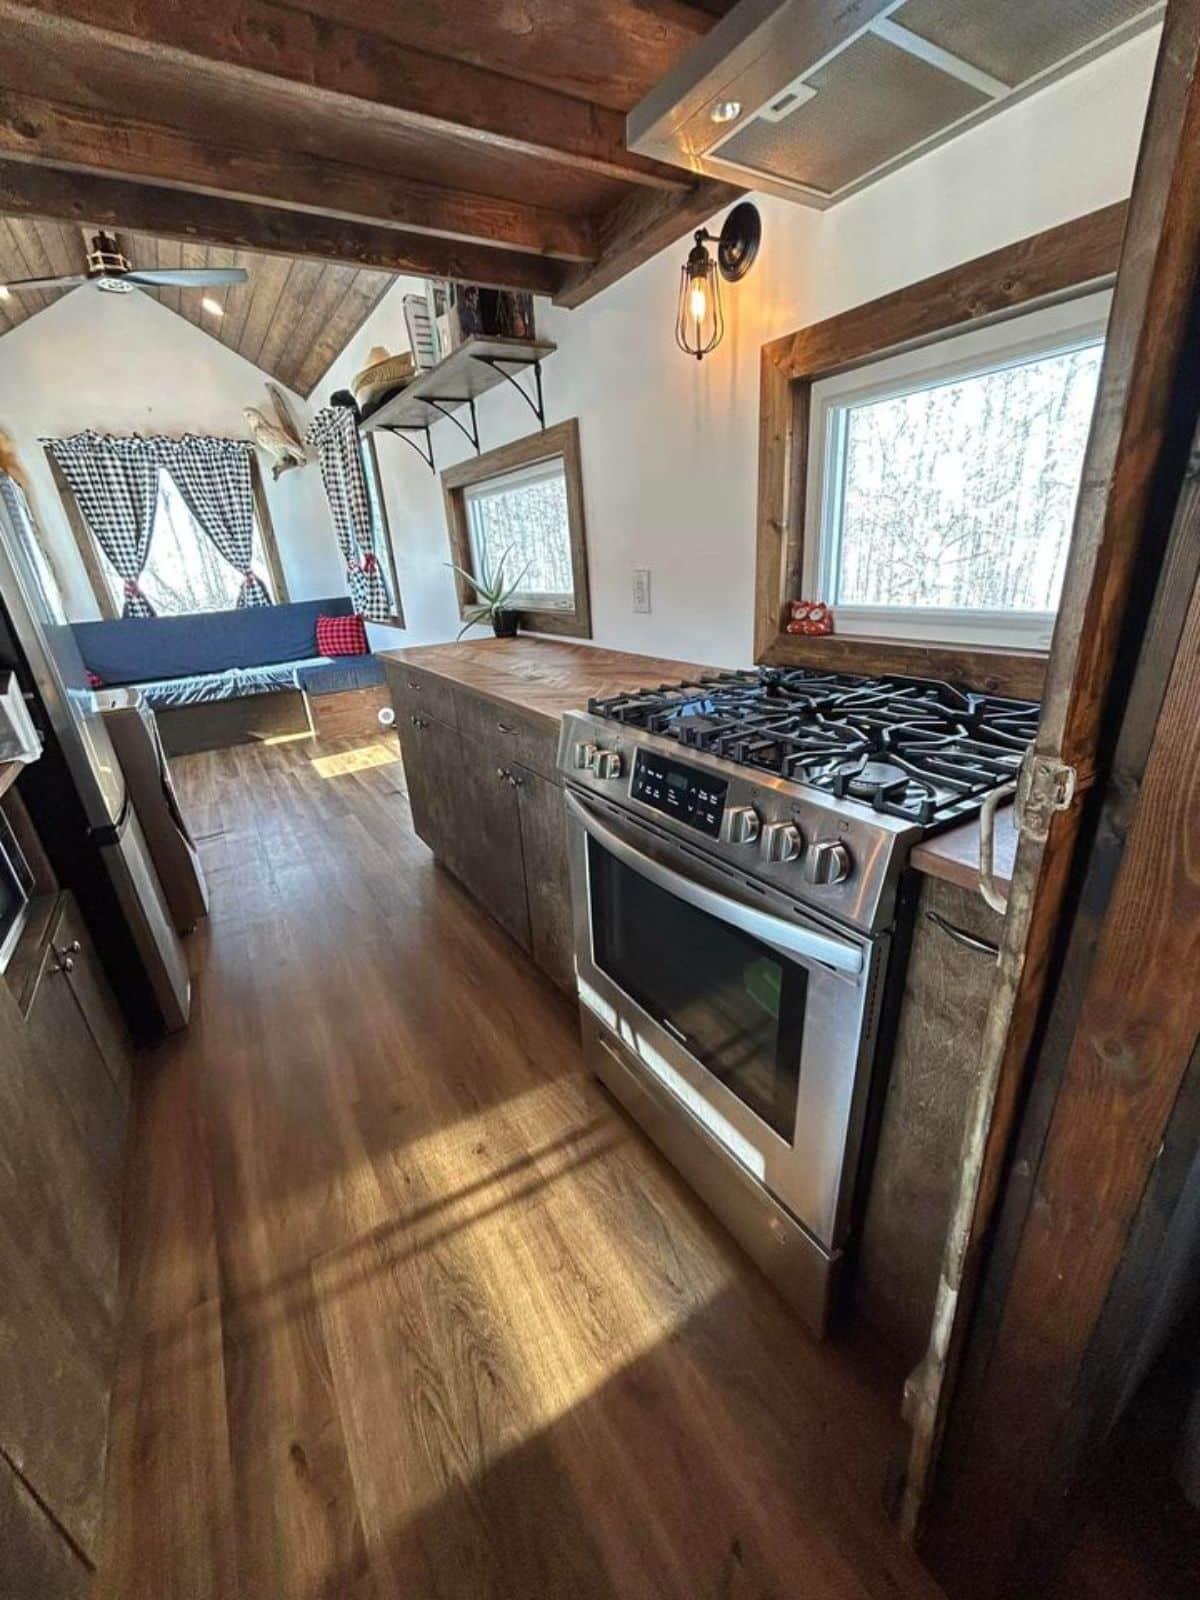 double galley kitchen area with long countertop, stove cum oven and storage cabinets on 1 side